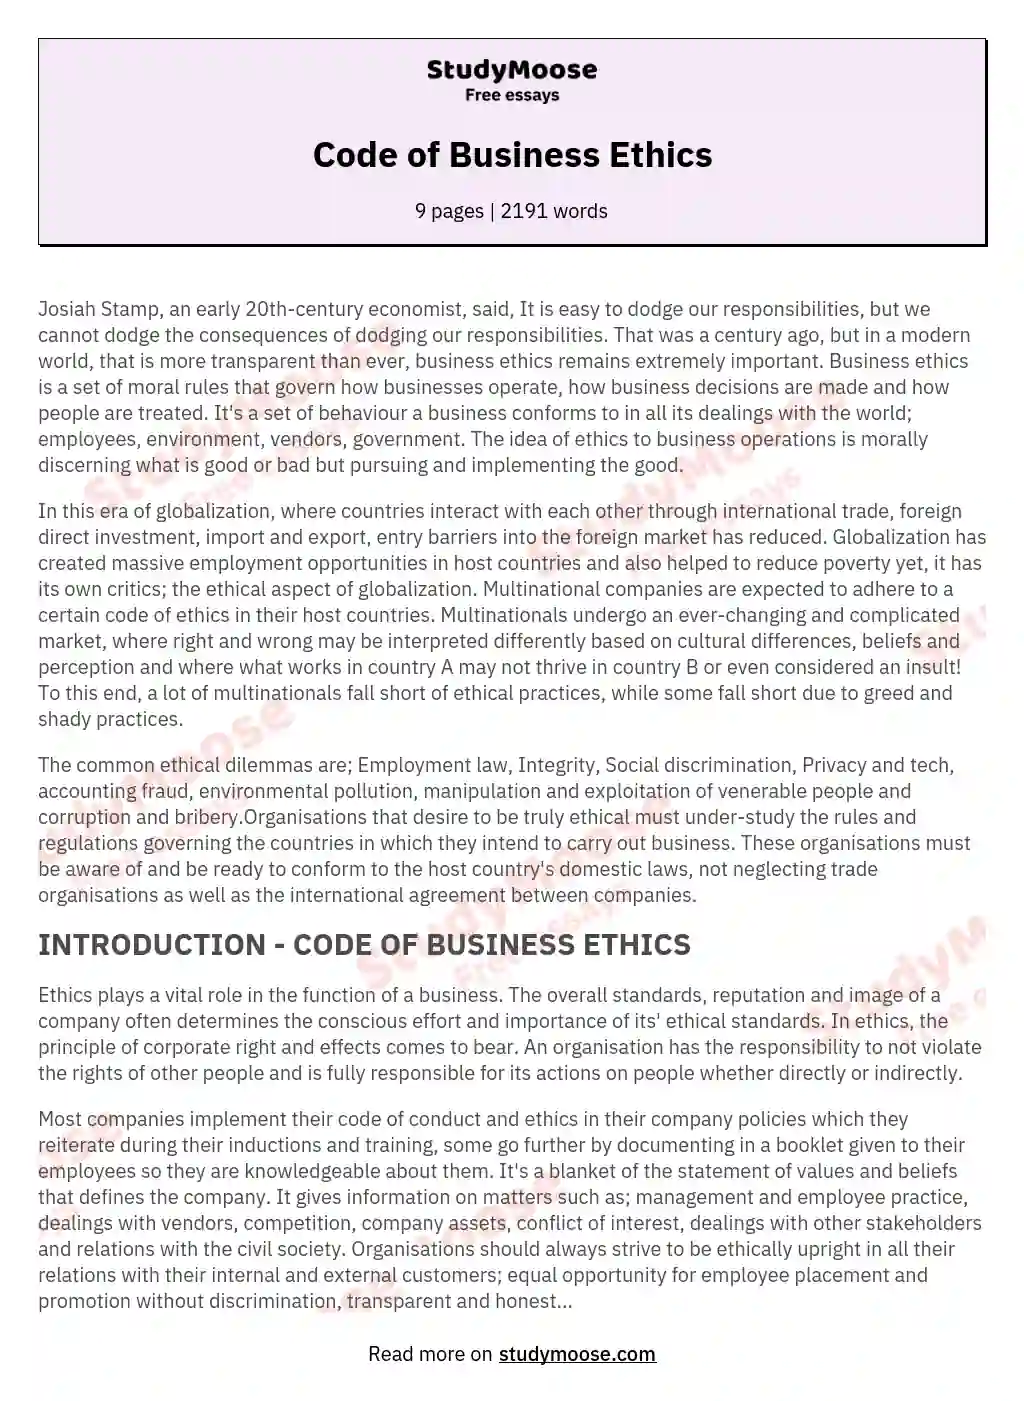 Code of Business Ethics essay